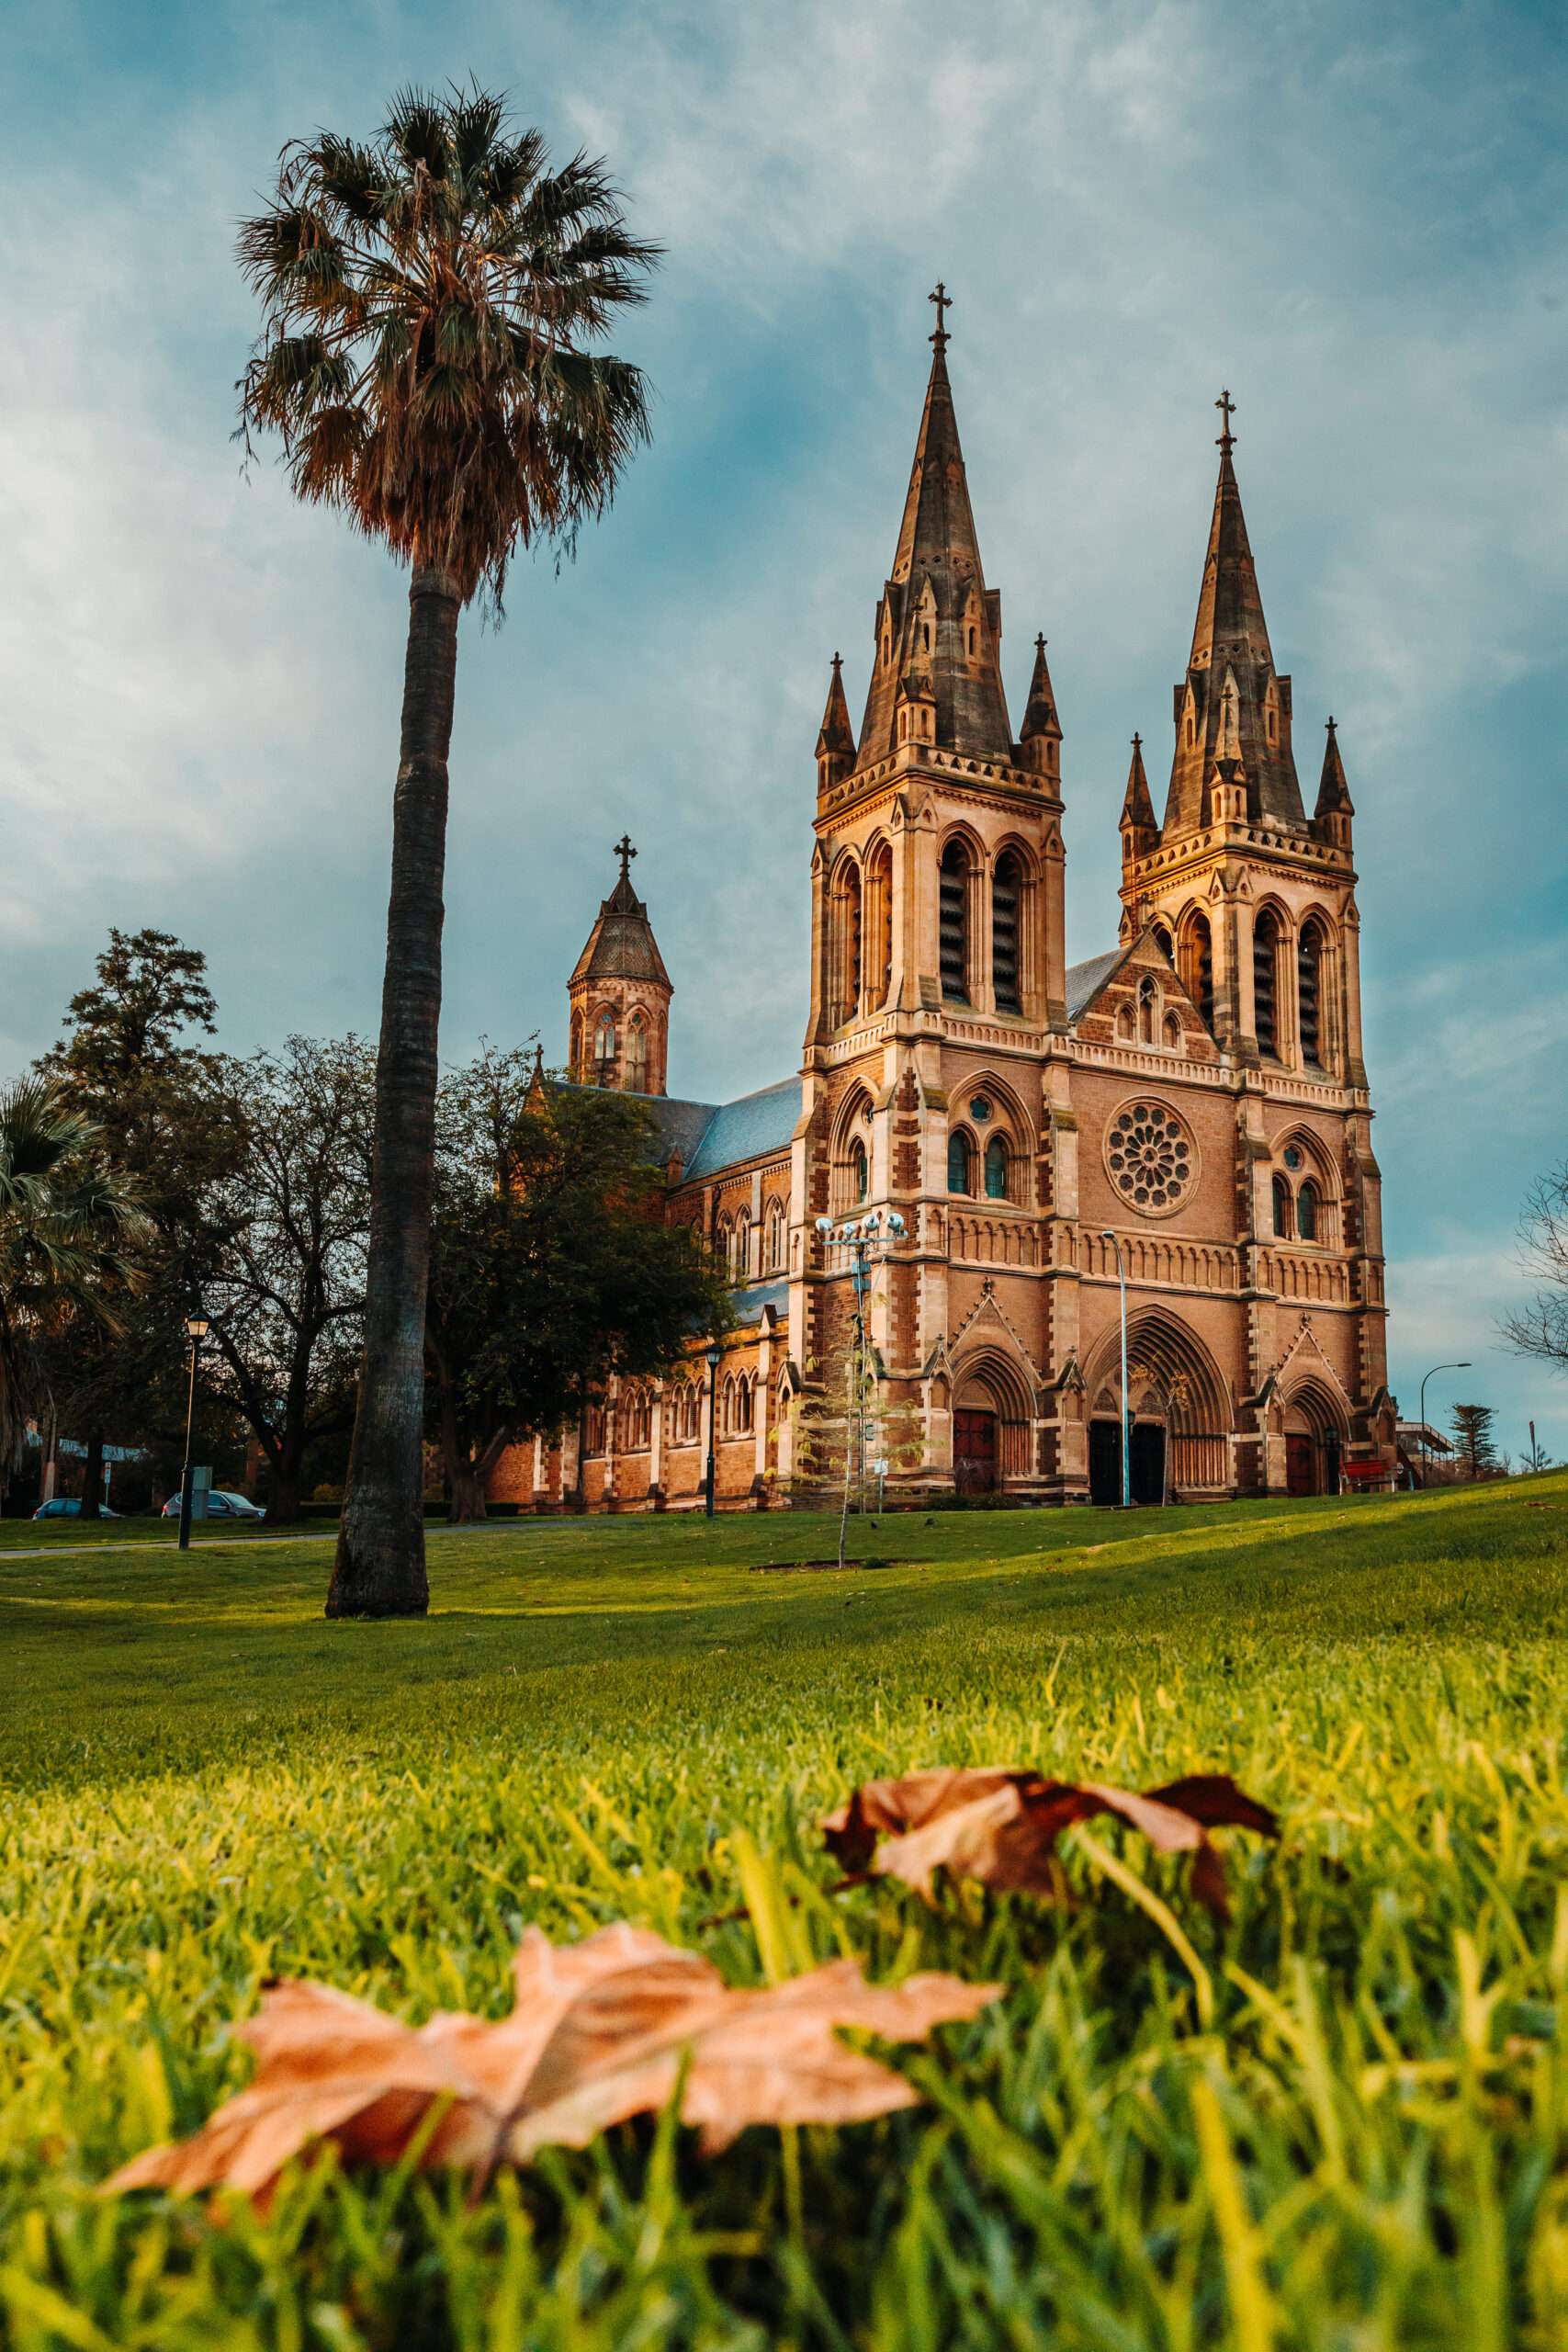 VSMR Vertical shot of the St Xaviers Cathedral in Adelaide, Australia